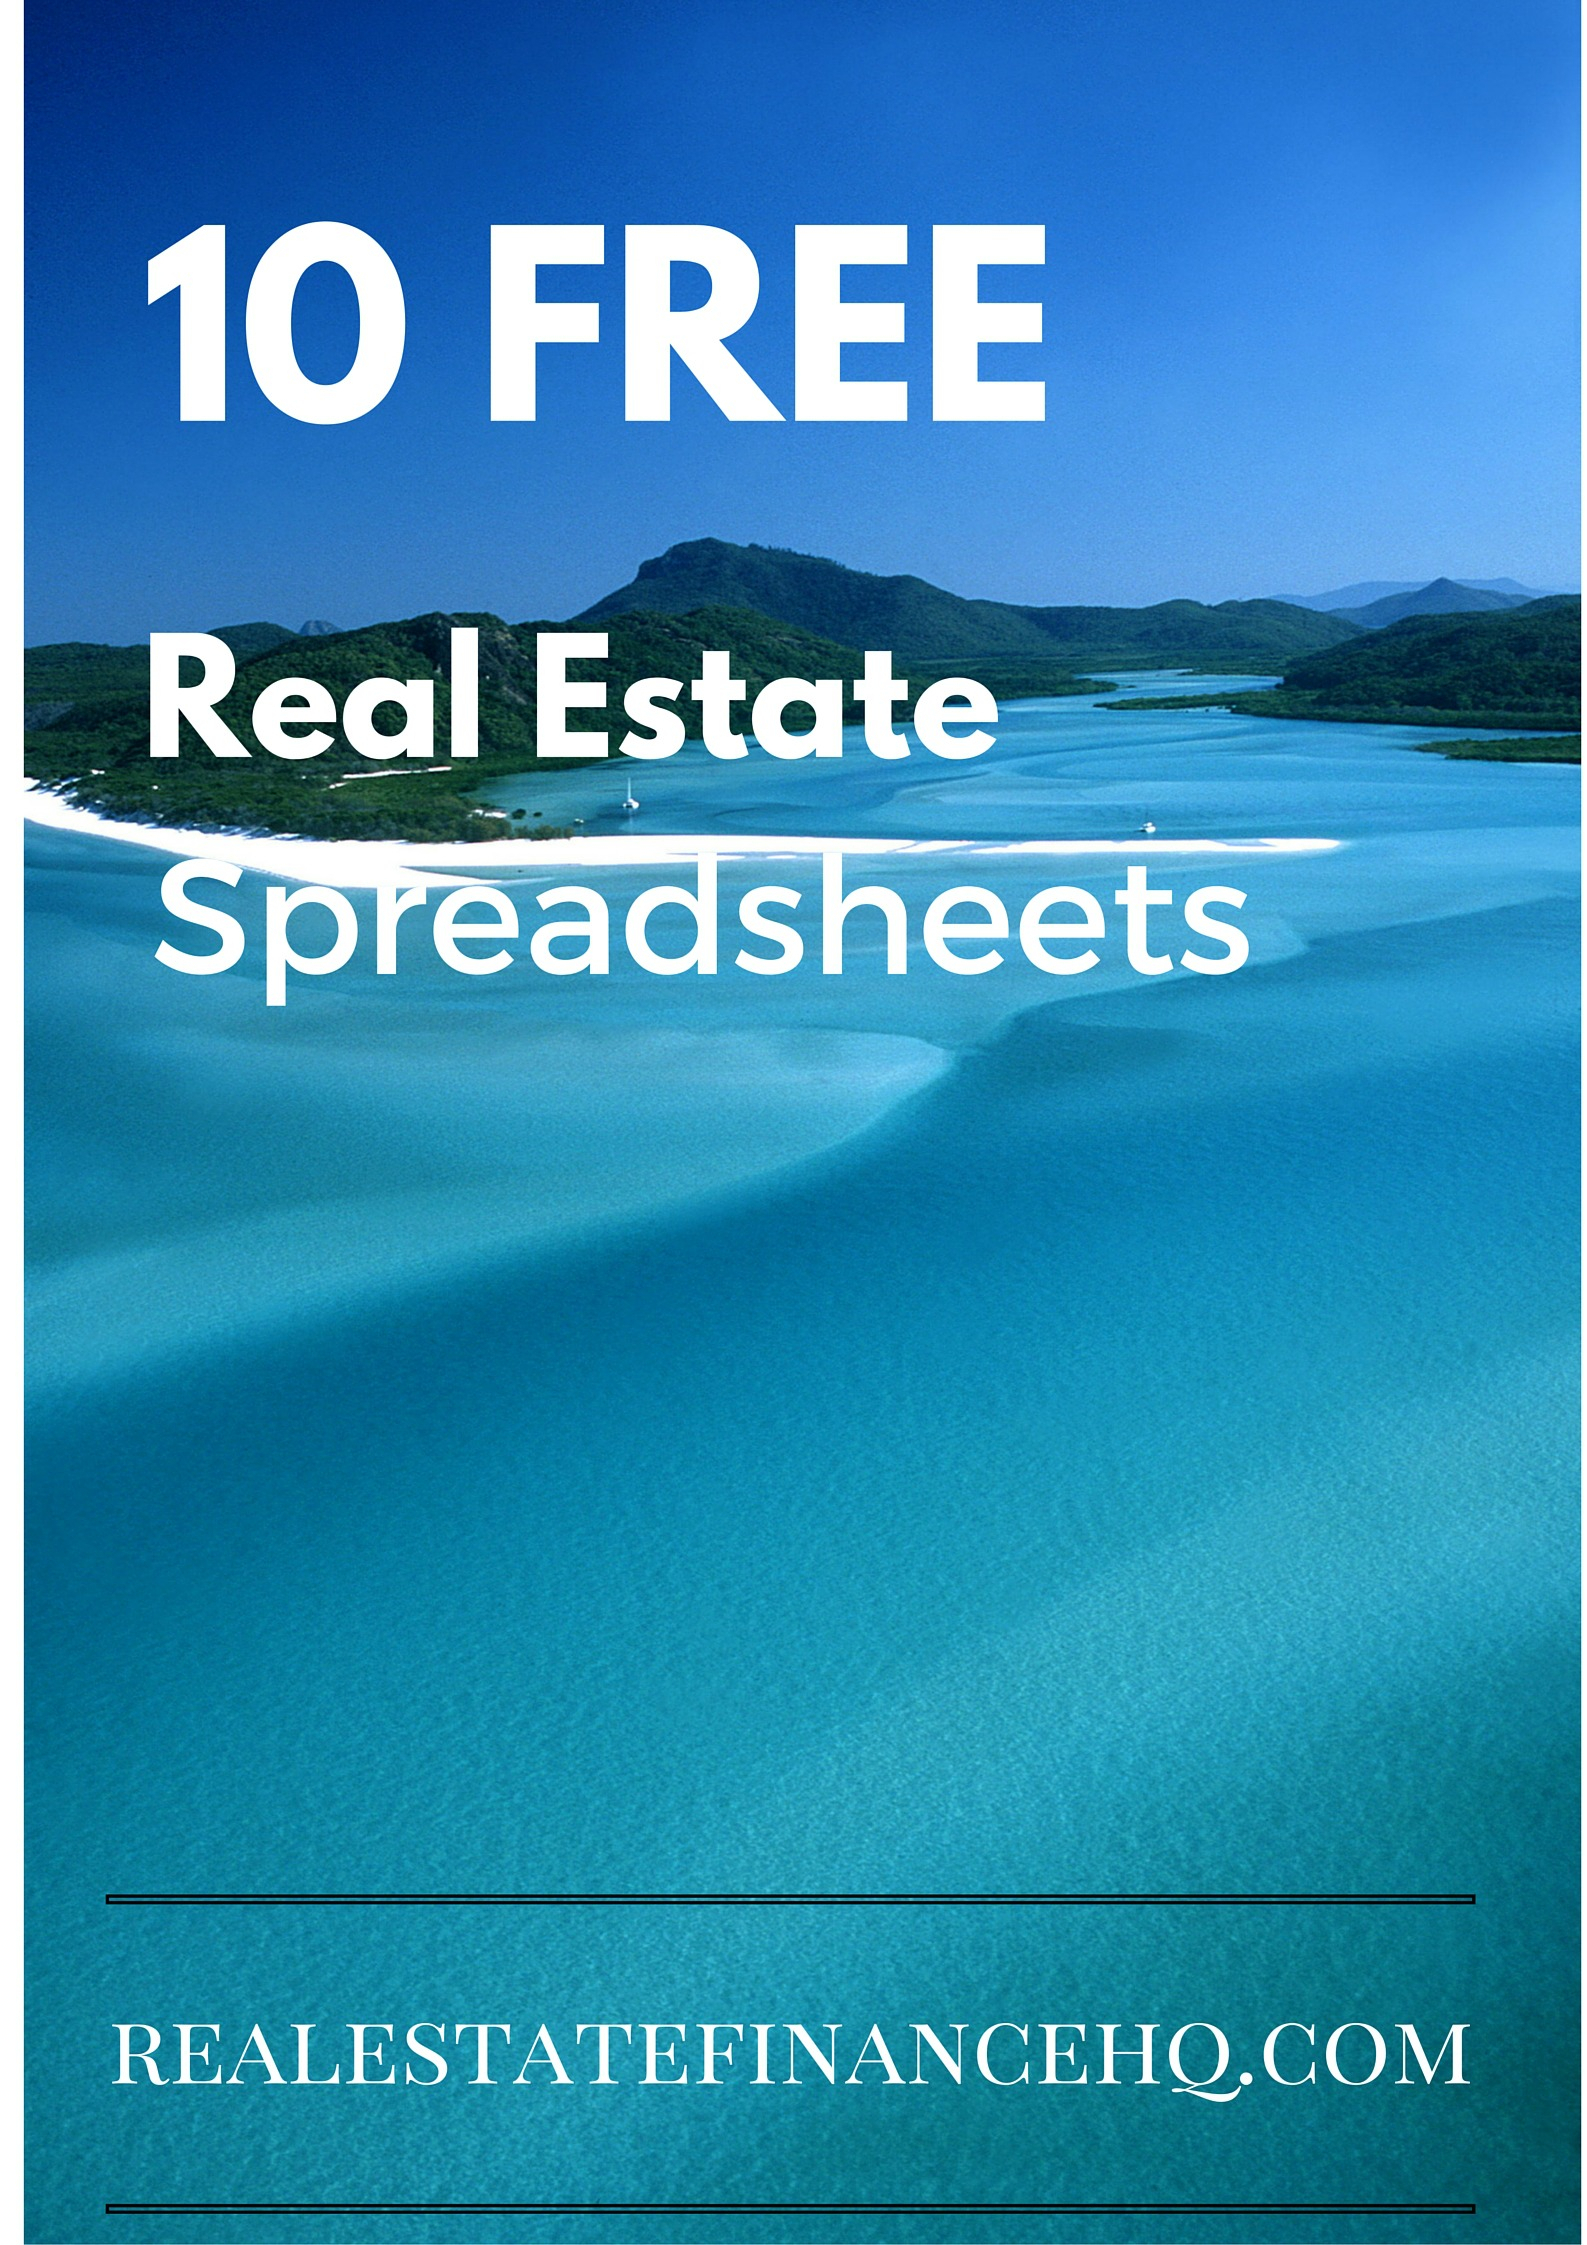 10 Free Real Estate Spreadsheets - Real Estate Finance Throughout Real Estate Investment Calculator Spreadsheet